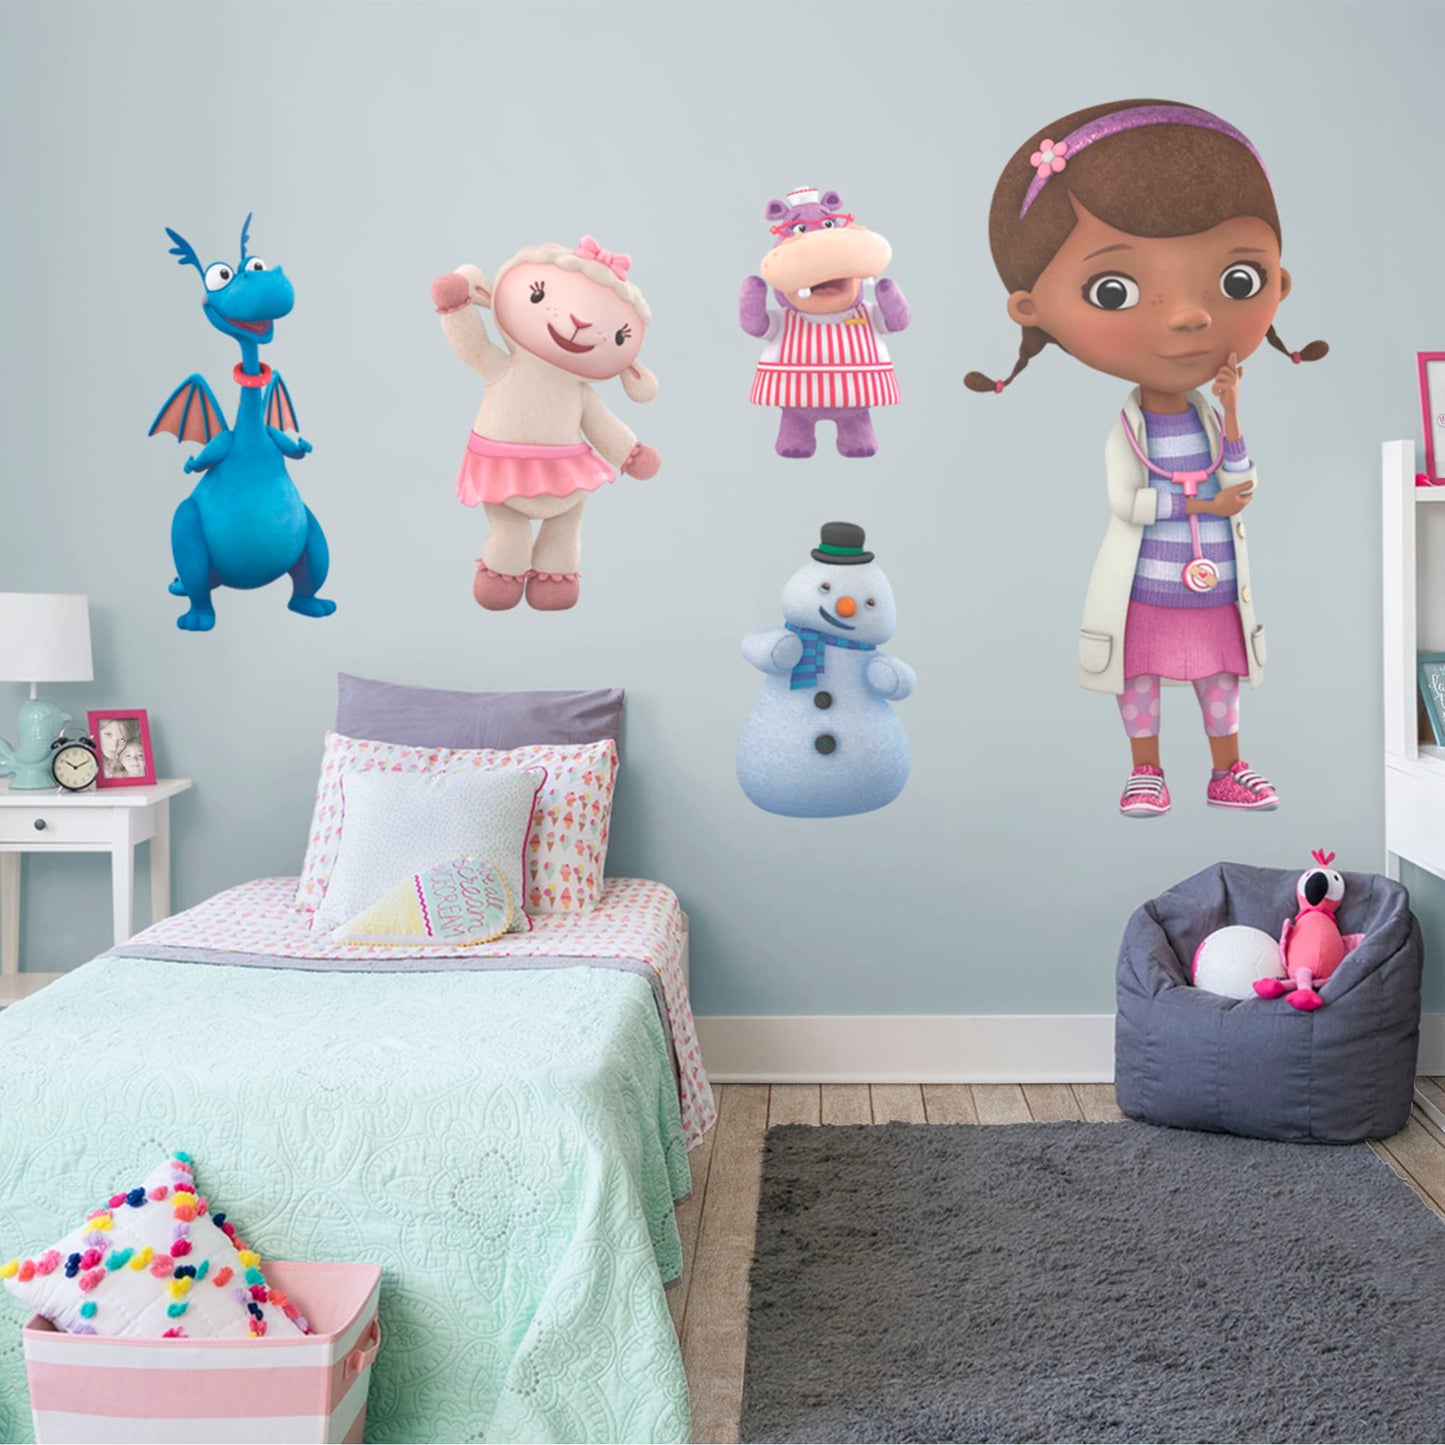 Doc McStuffins: Collection - Officially Licensed Disney Removable Wall Decals